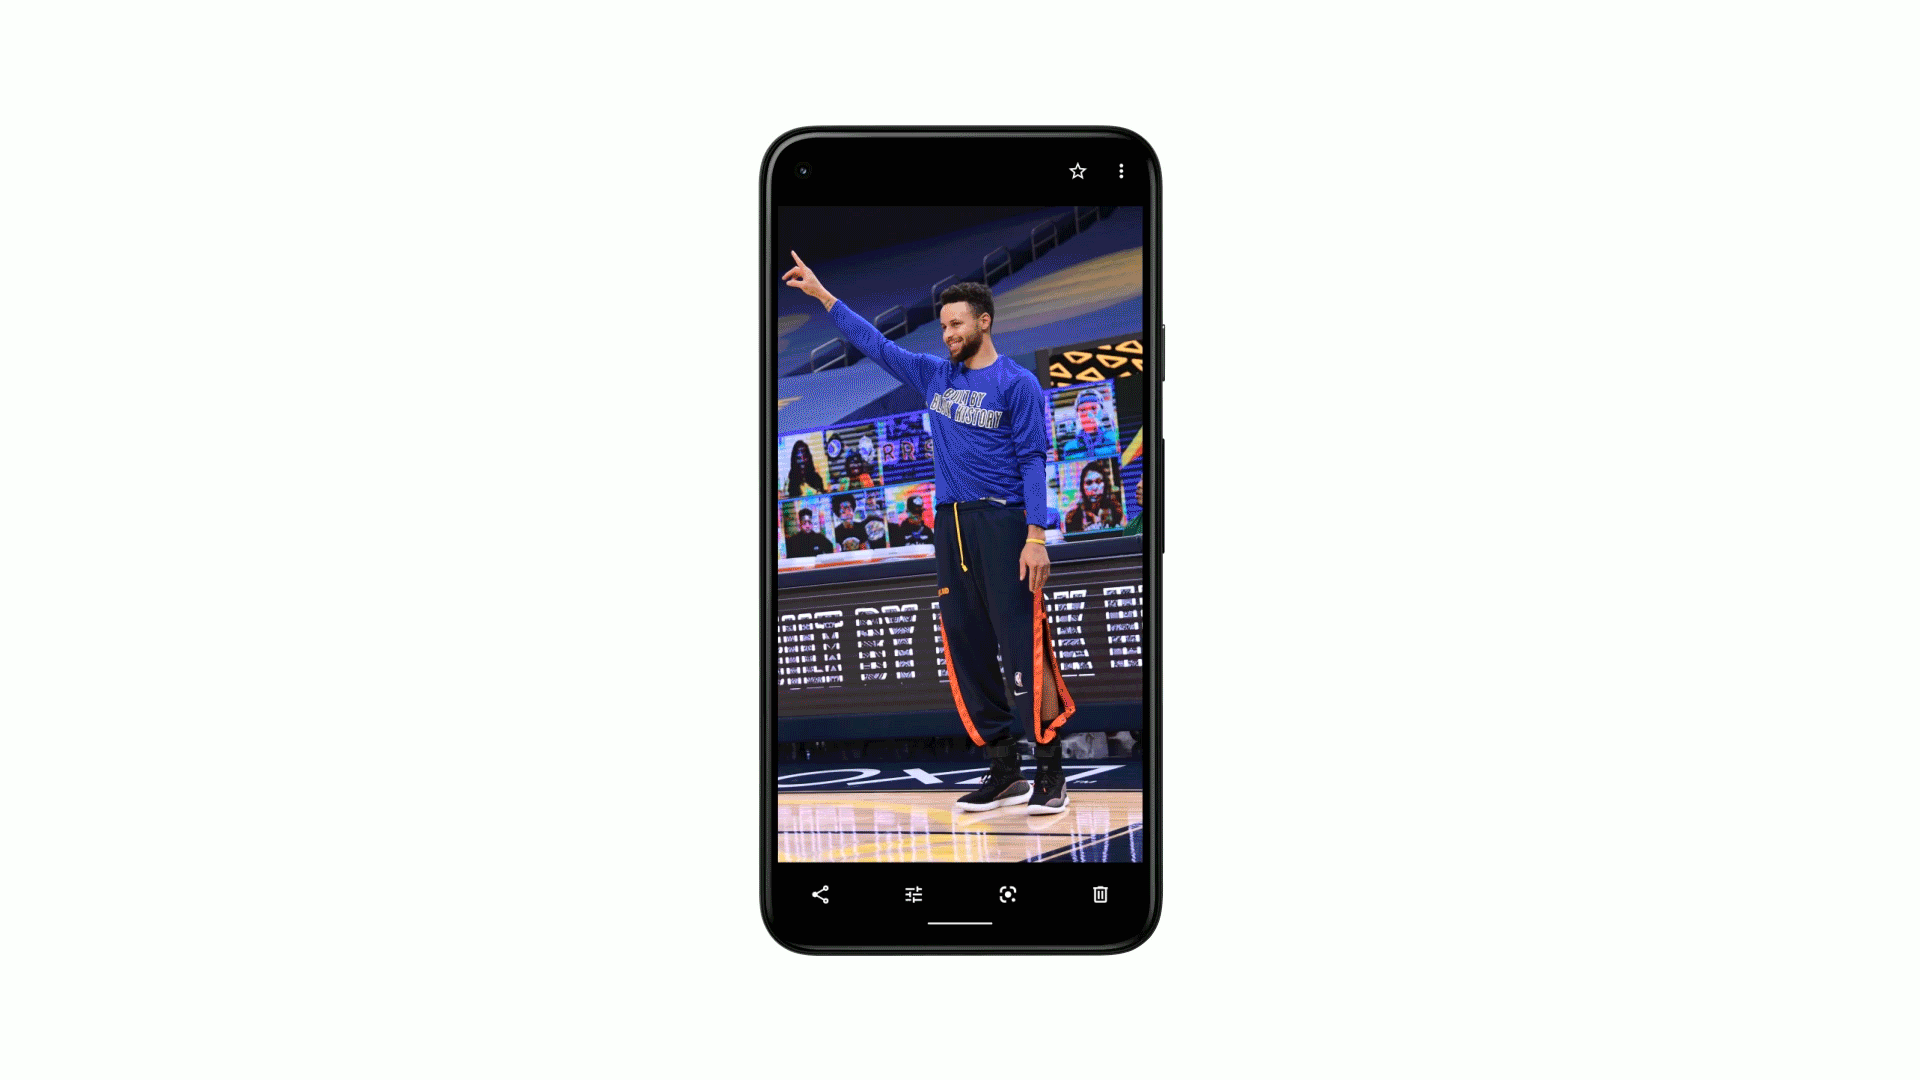 A GIF demonstrating using Google Lens to search a screen shot of a basketball player, returning results for his shoes